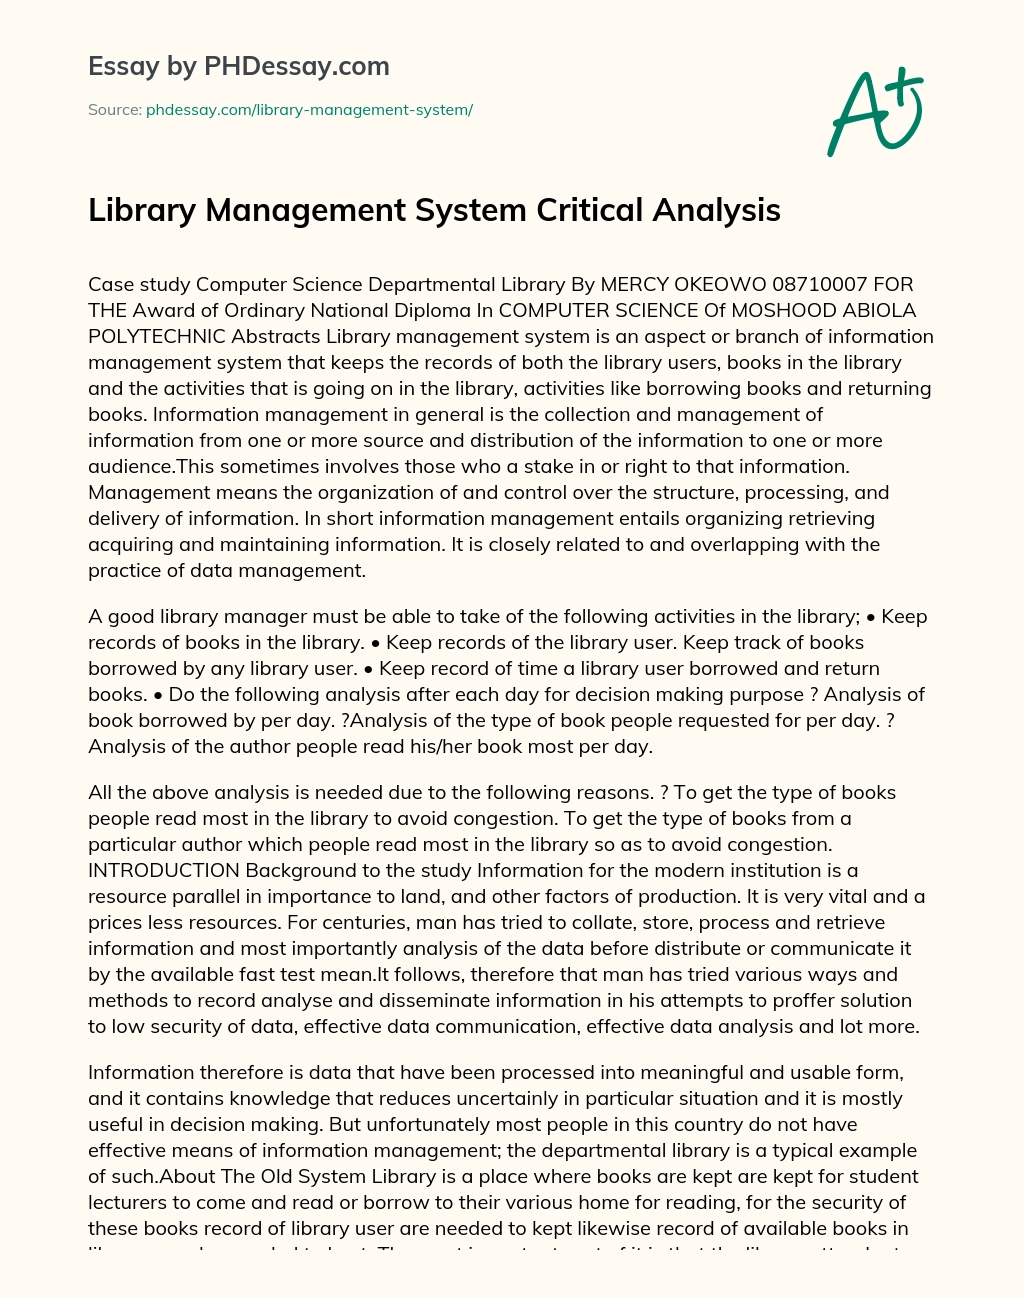 Library Management System Critical Analysis essay